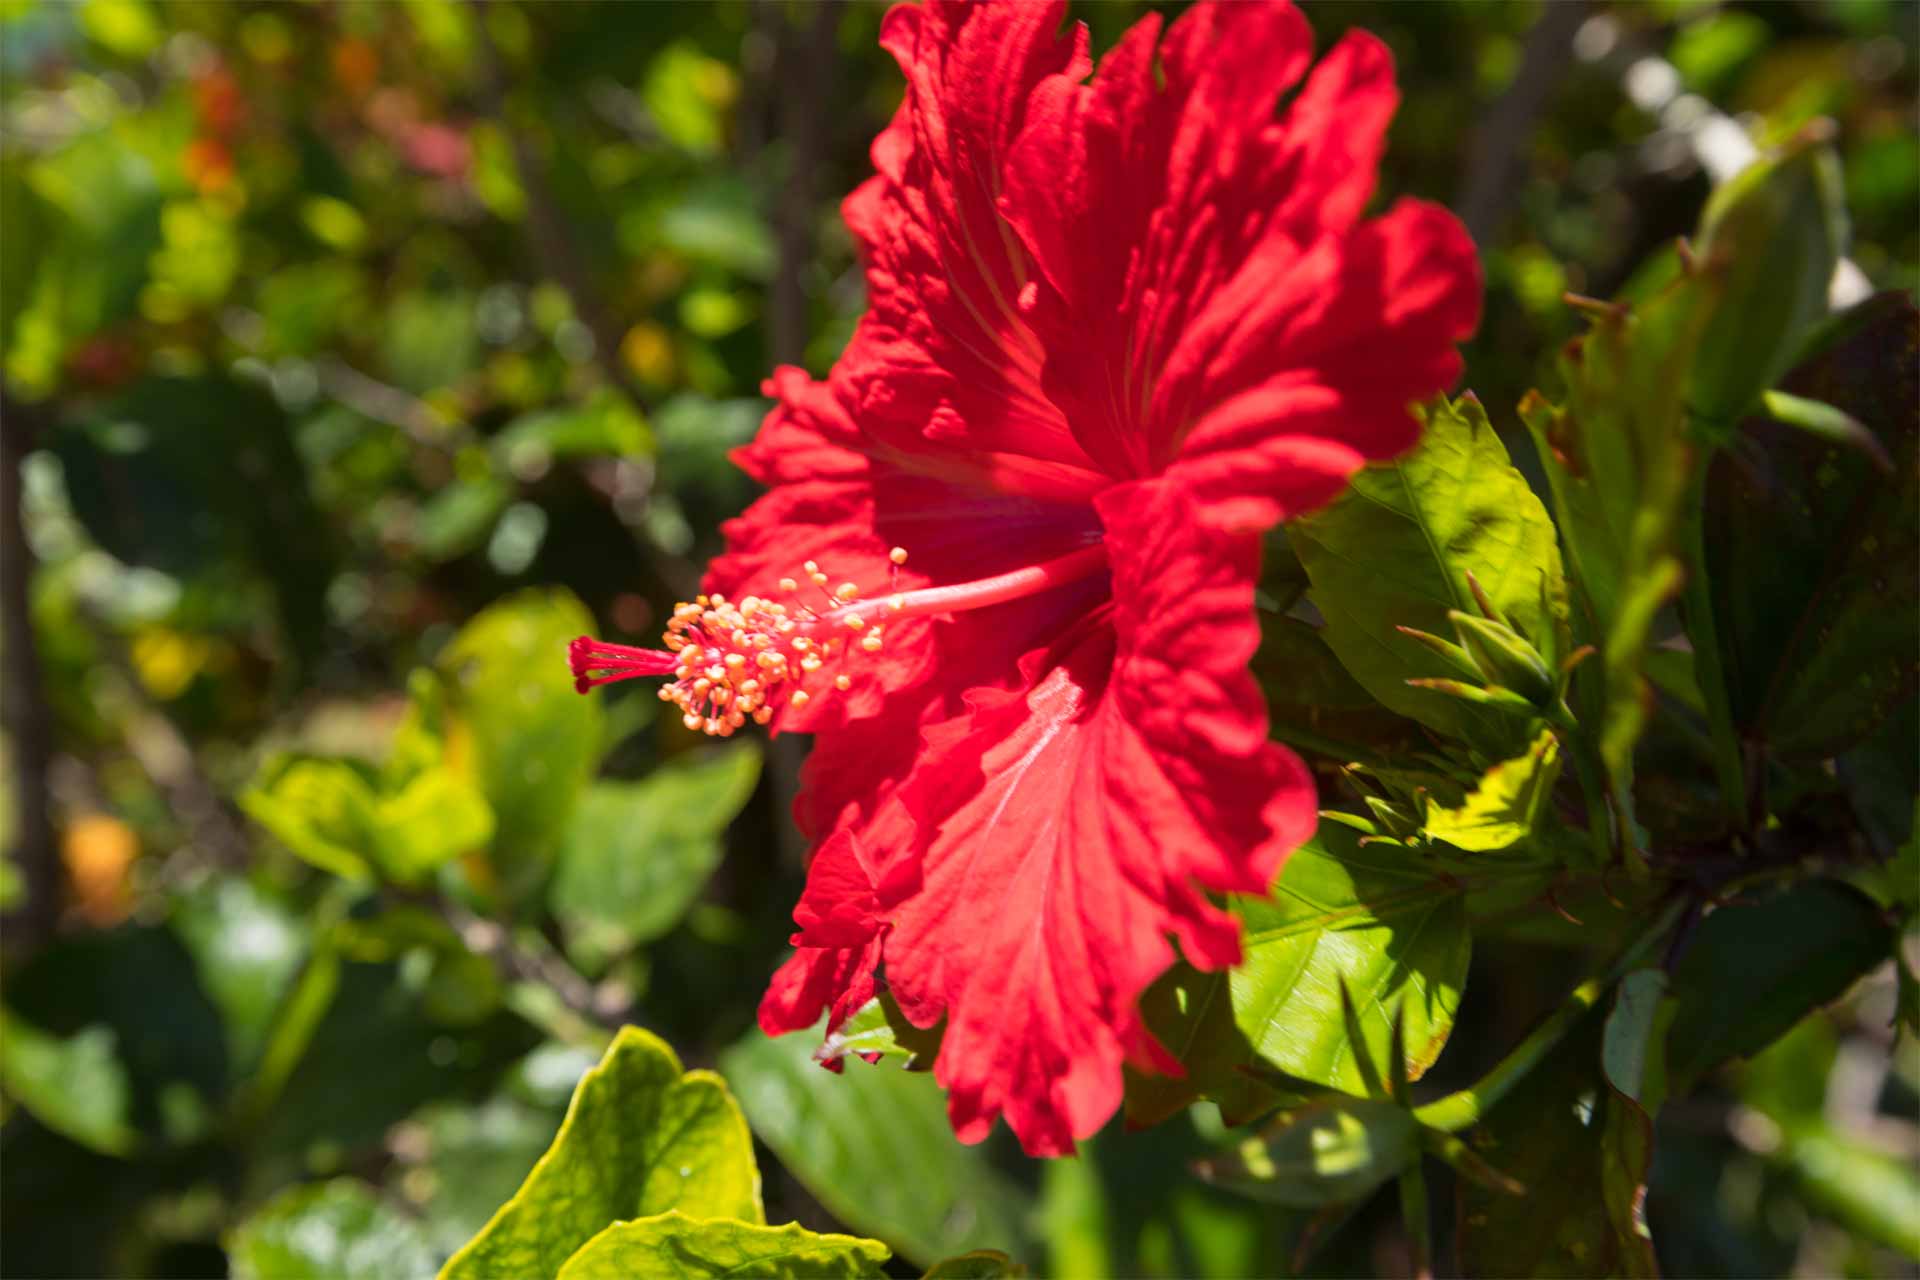 22. Hibiscus Flowers at Hotel Forster